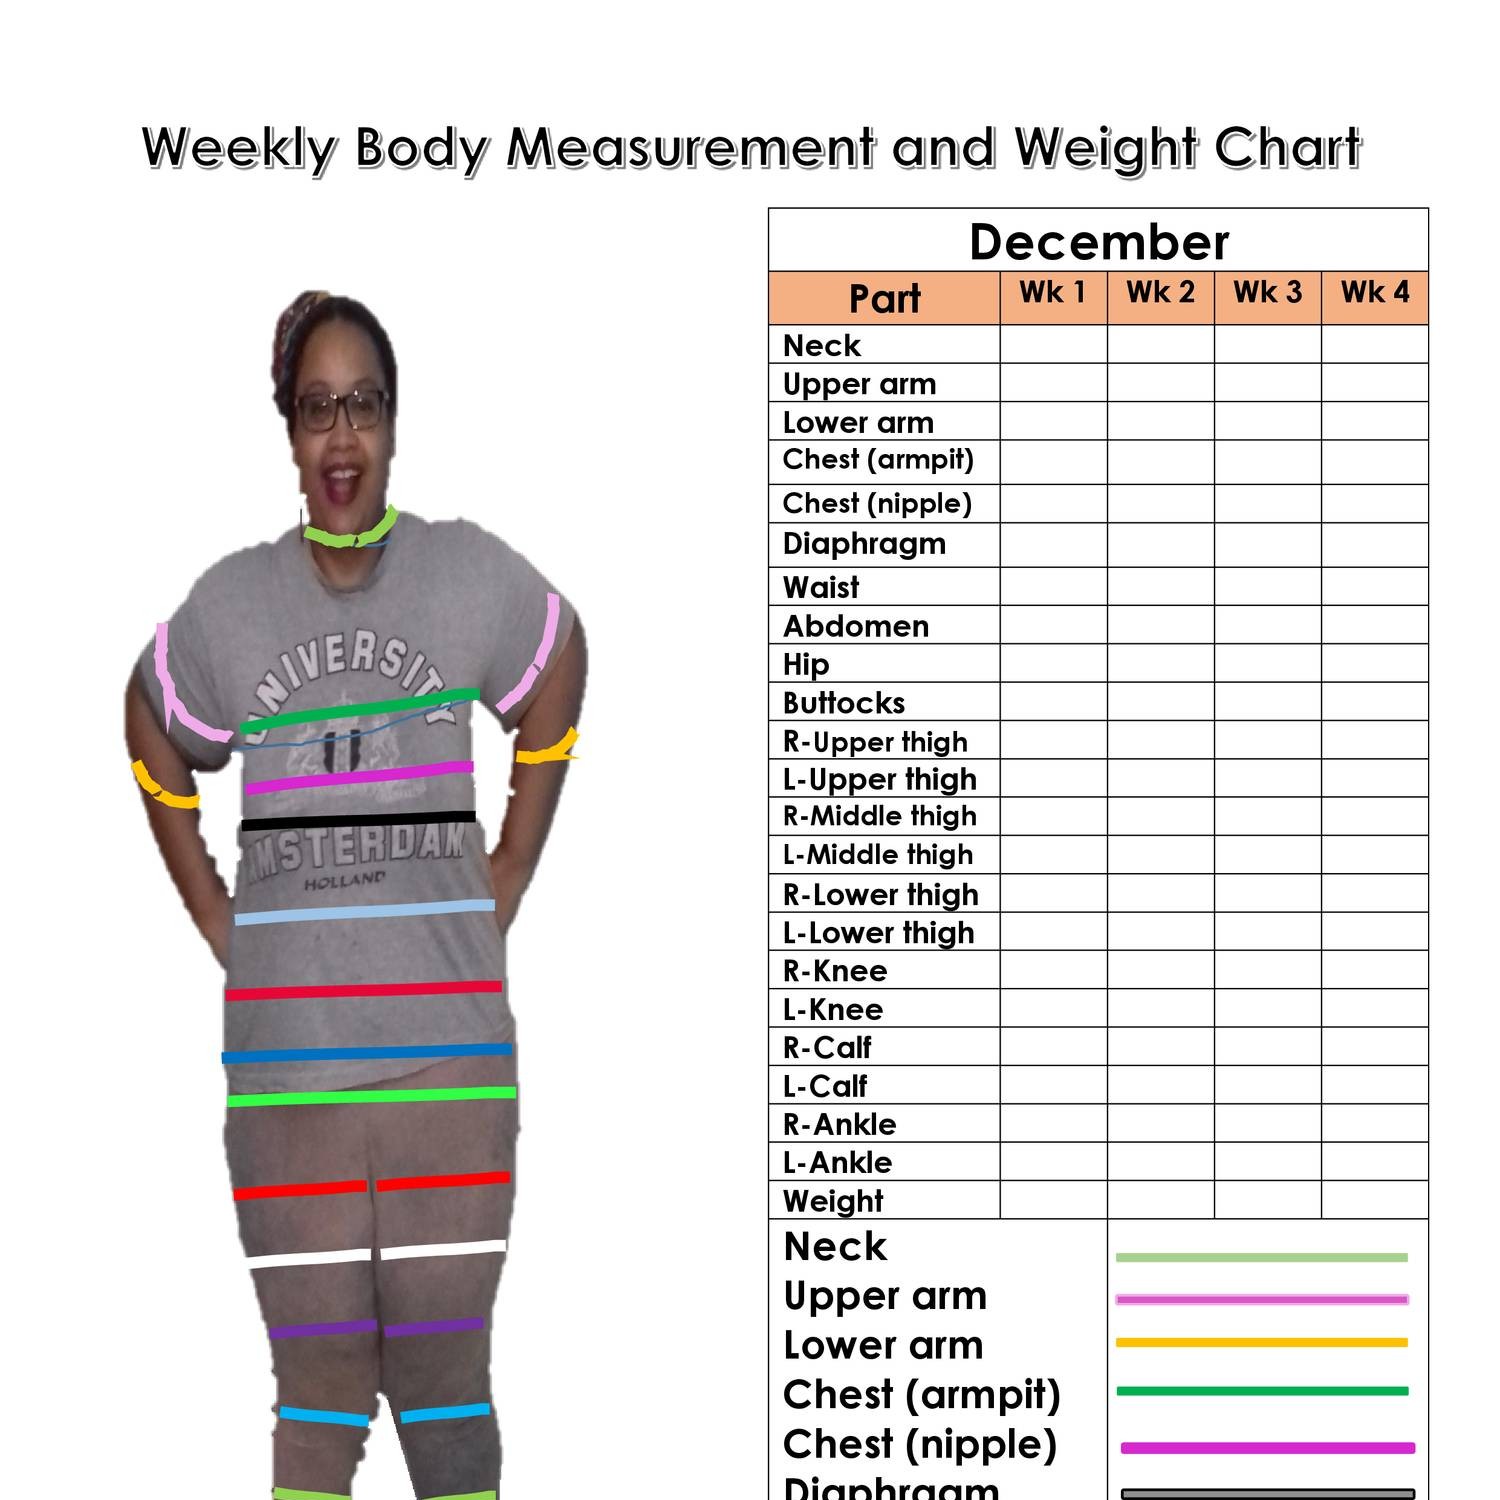 Weekly Body Measurement and Weight Chart A4.docx DocDroid